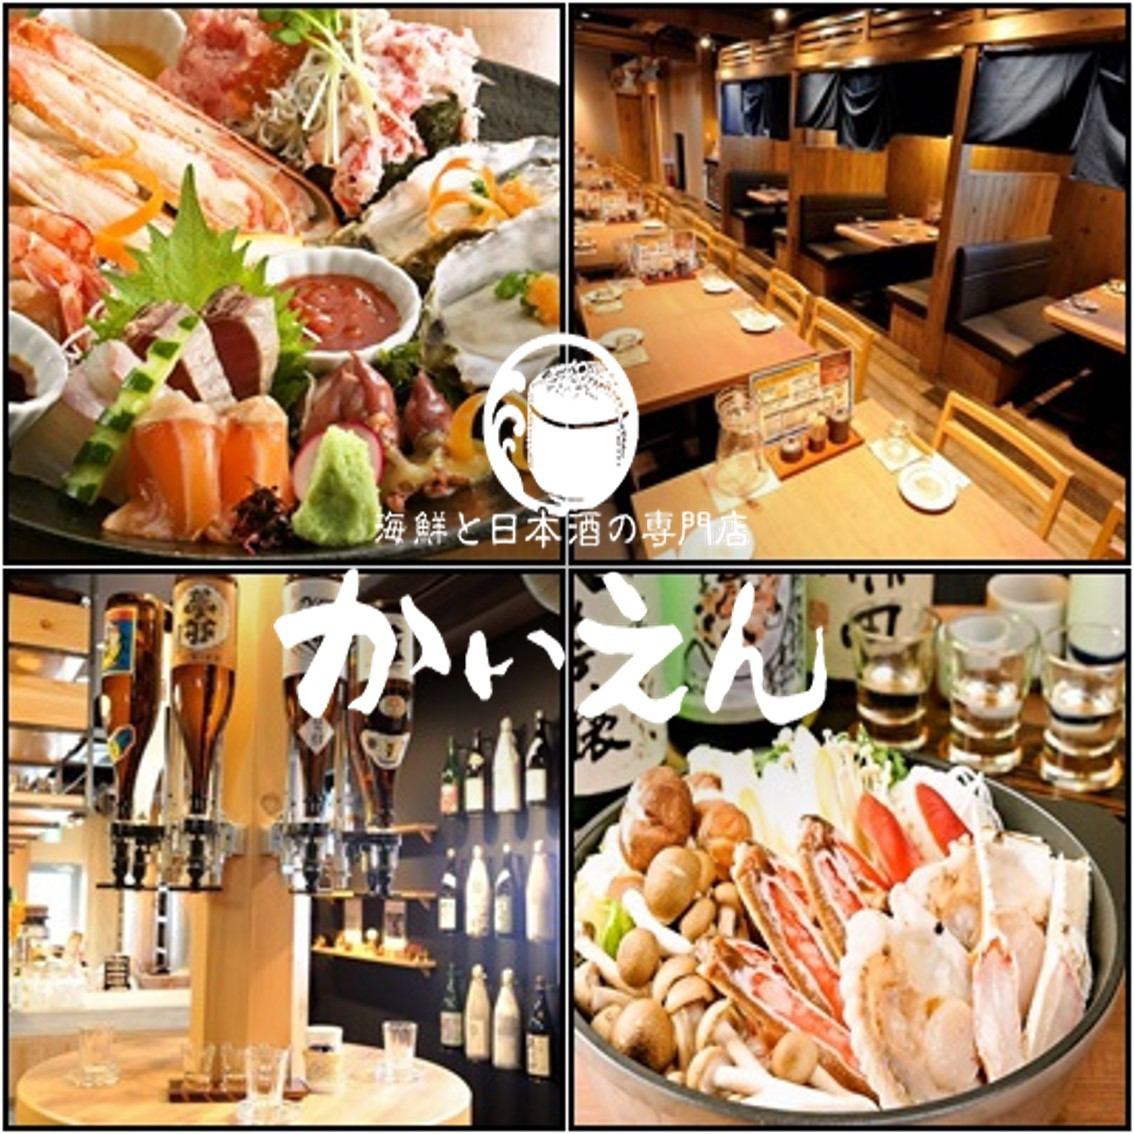 Fresh seafood and self drink are pleasant, a sake brewed with Japanese sake